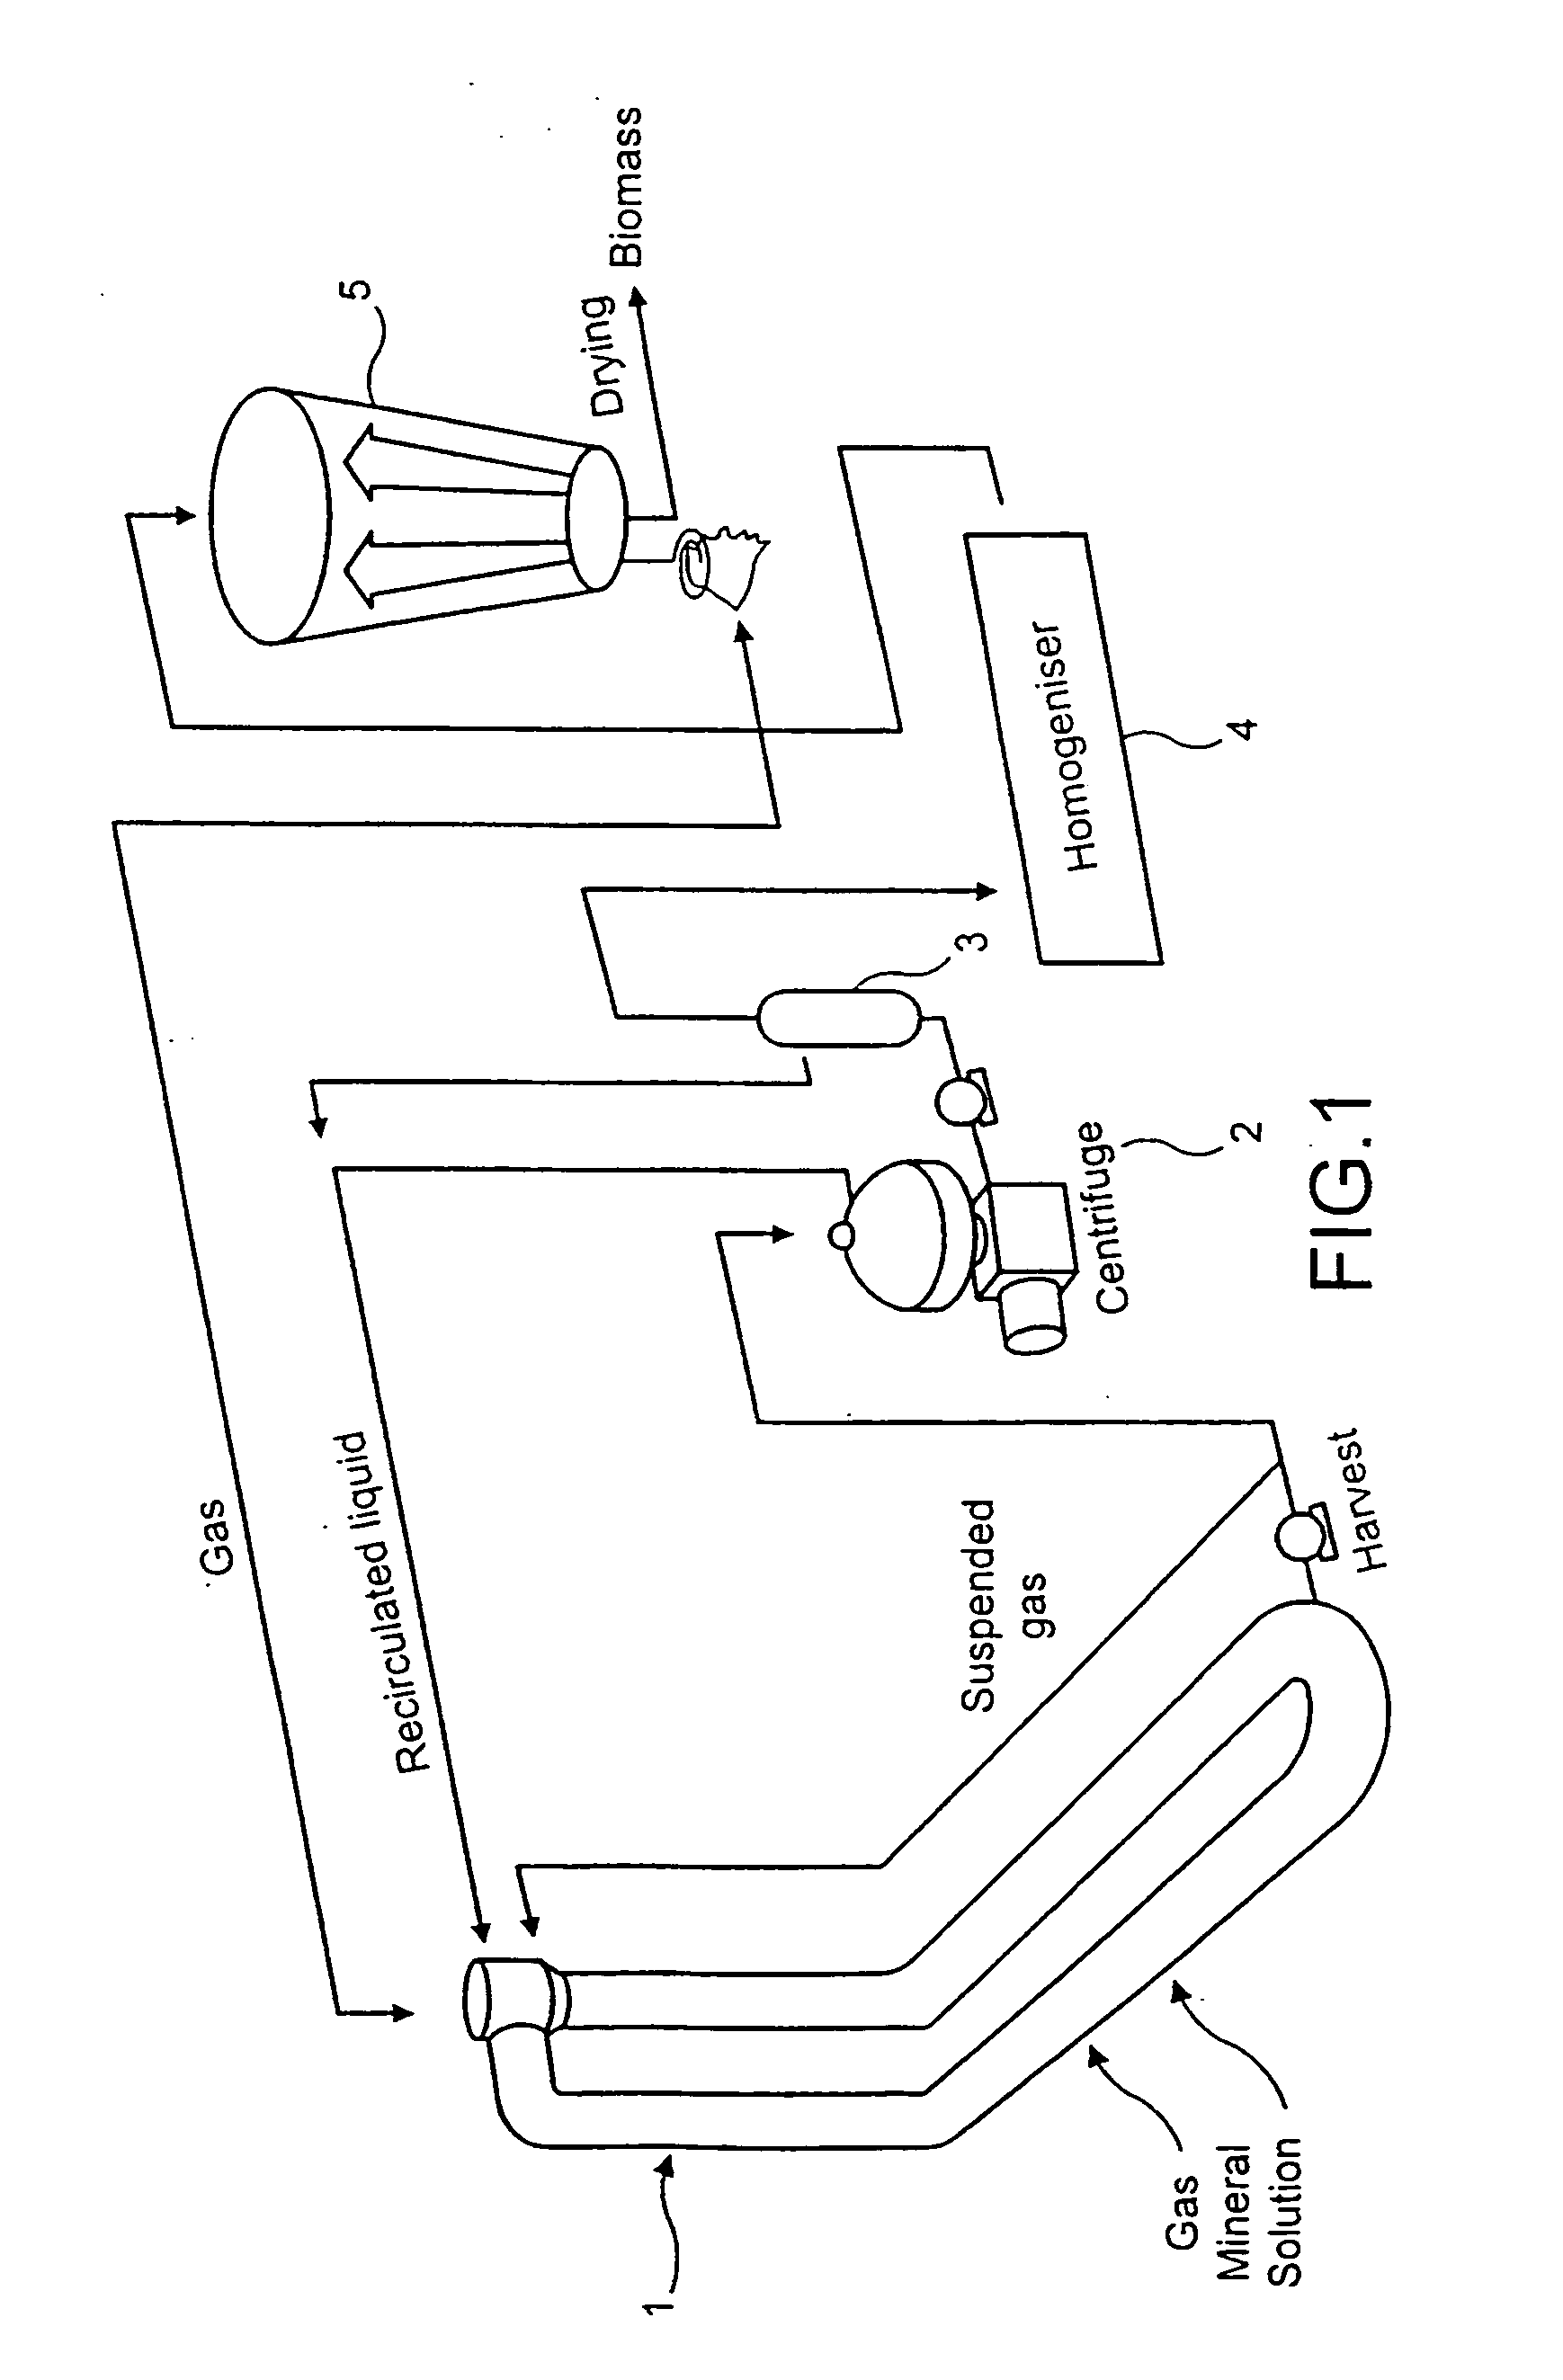 Method of extracting proteins from a cell